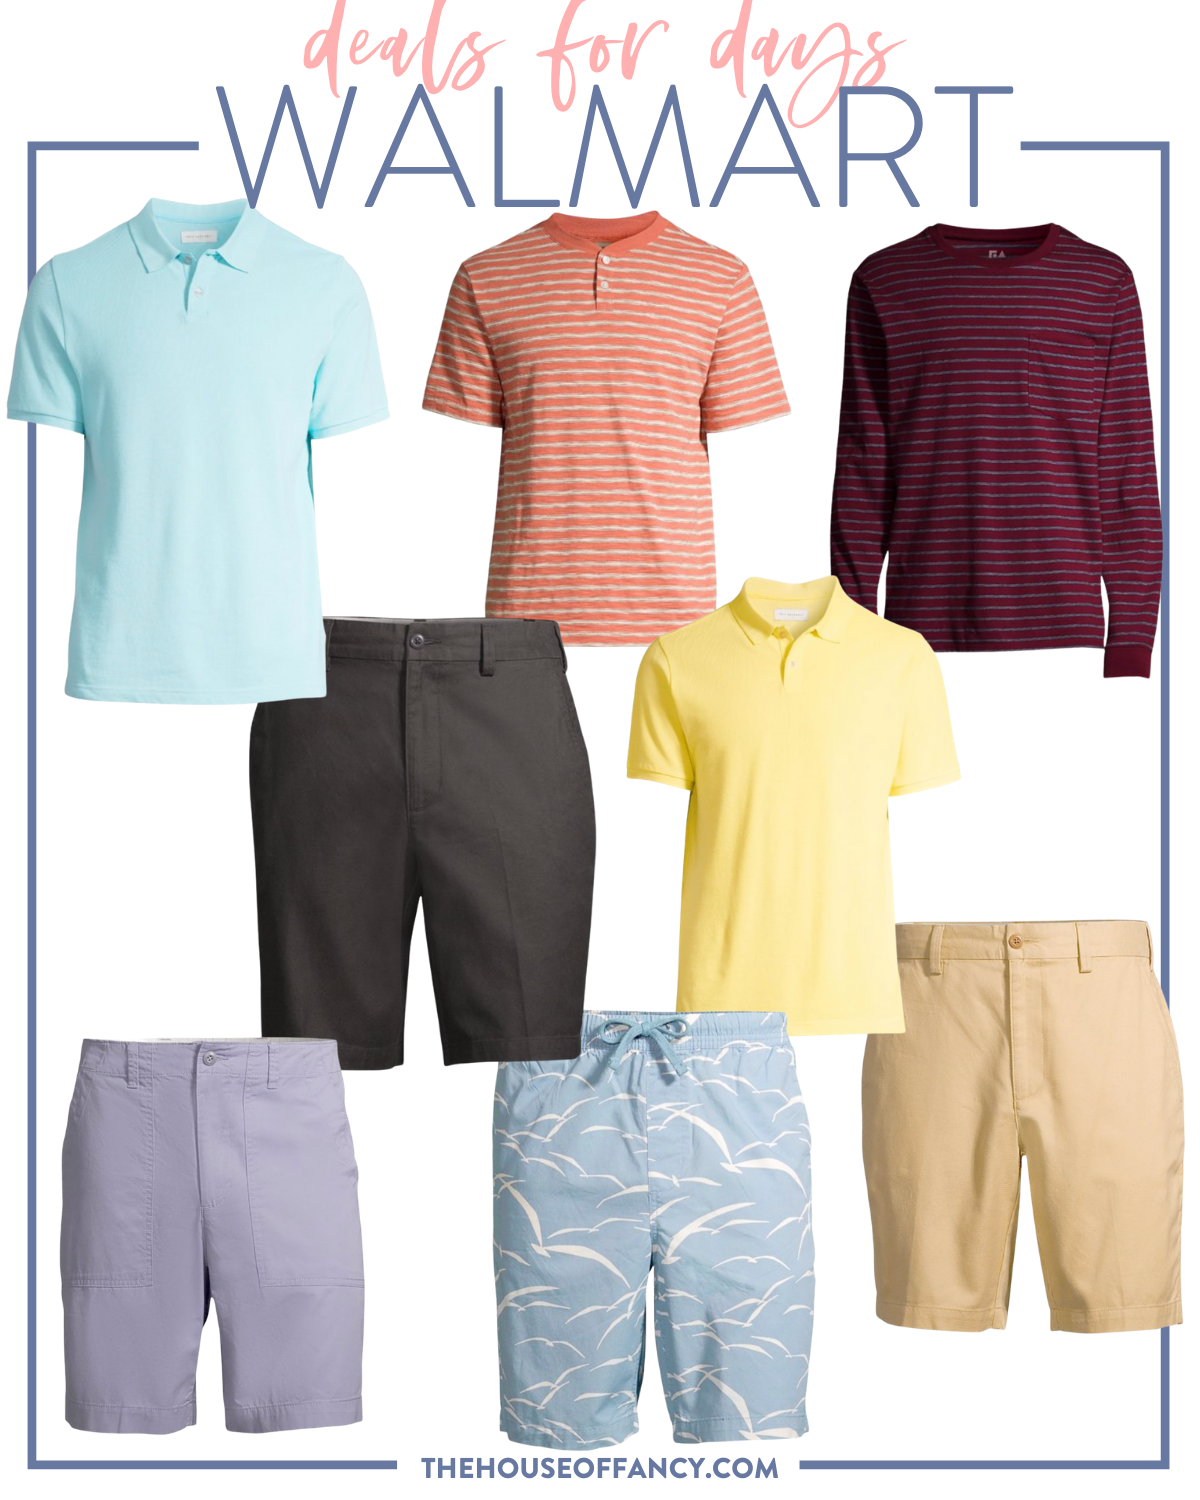 Walmart Deals for Days by popular Houston fashion blog, The House of Fancy: image of a yellow polo shirt, orange and grey stripe polo shirt, blue polo shirt, grey shorts, charcoal grey shorts, khaki shorts, blue and white bird print shorts ,and red and grey stripe long sleeve shirt.